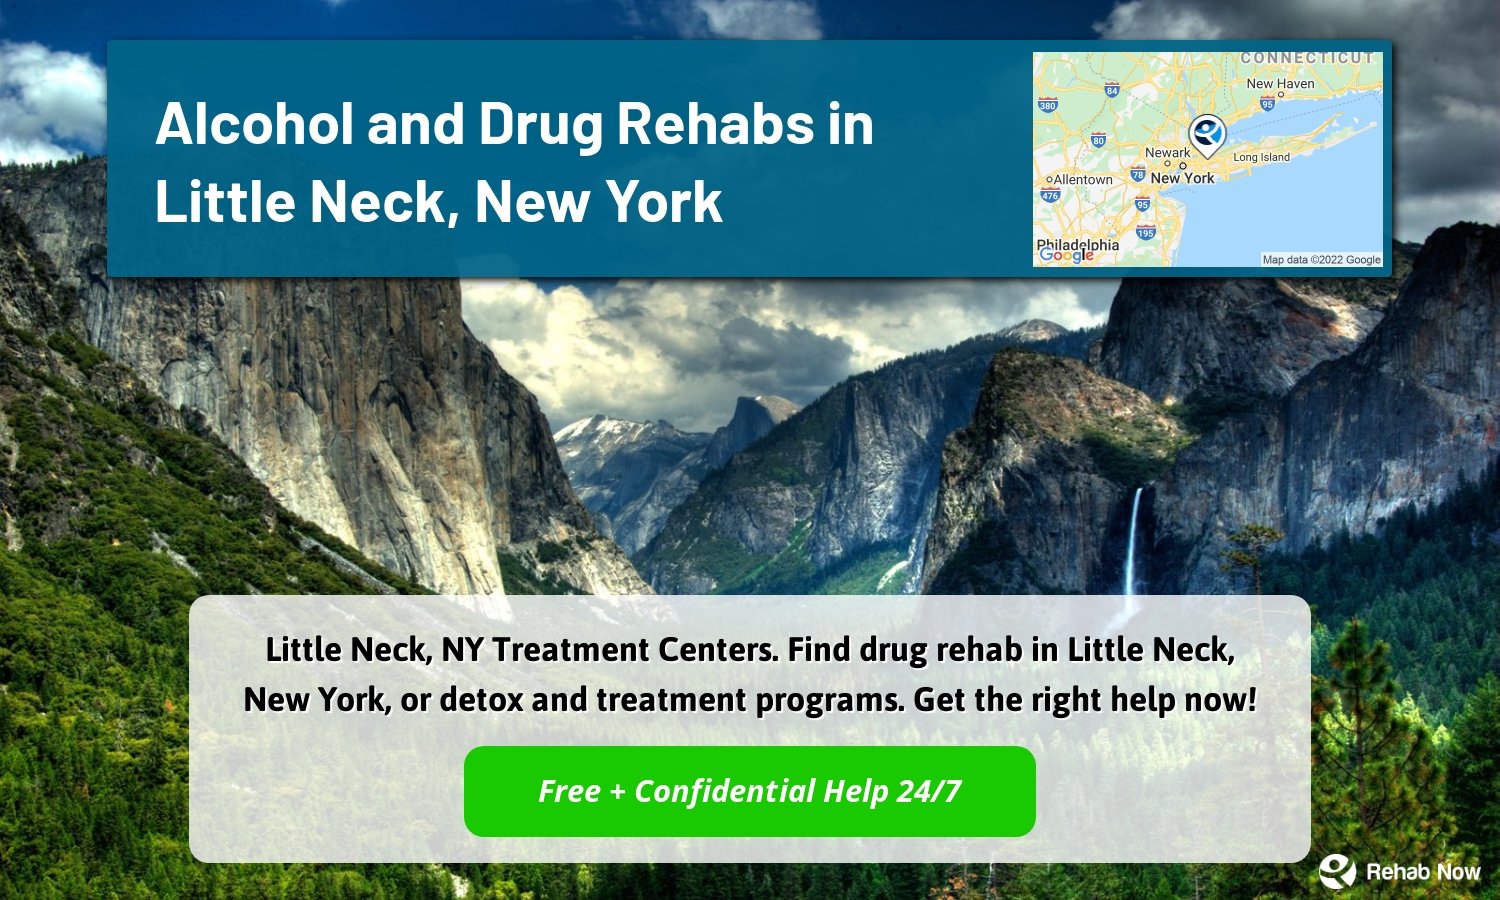 Little Neck, NY Treatment Centers. Find drug rehab in Little Neck, New York, or detox and treatment programs. Get the right help now!